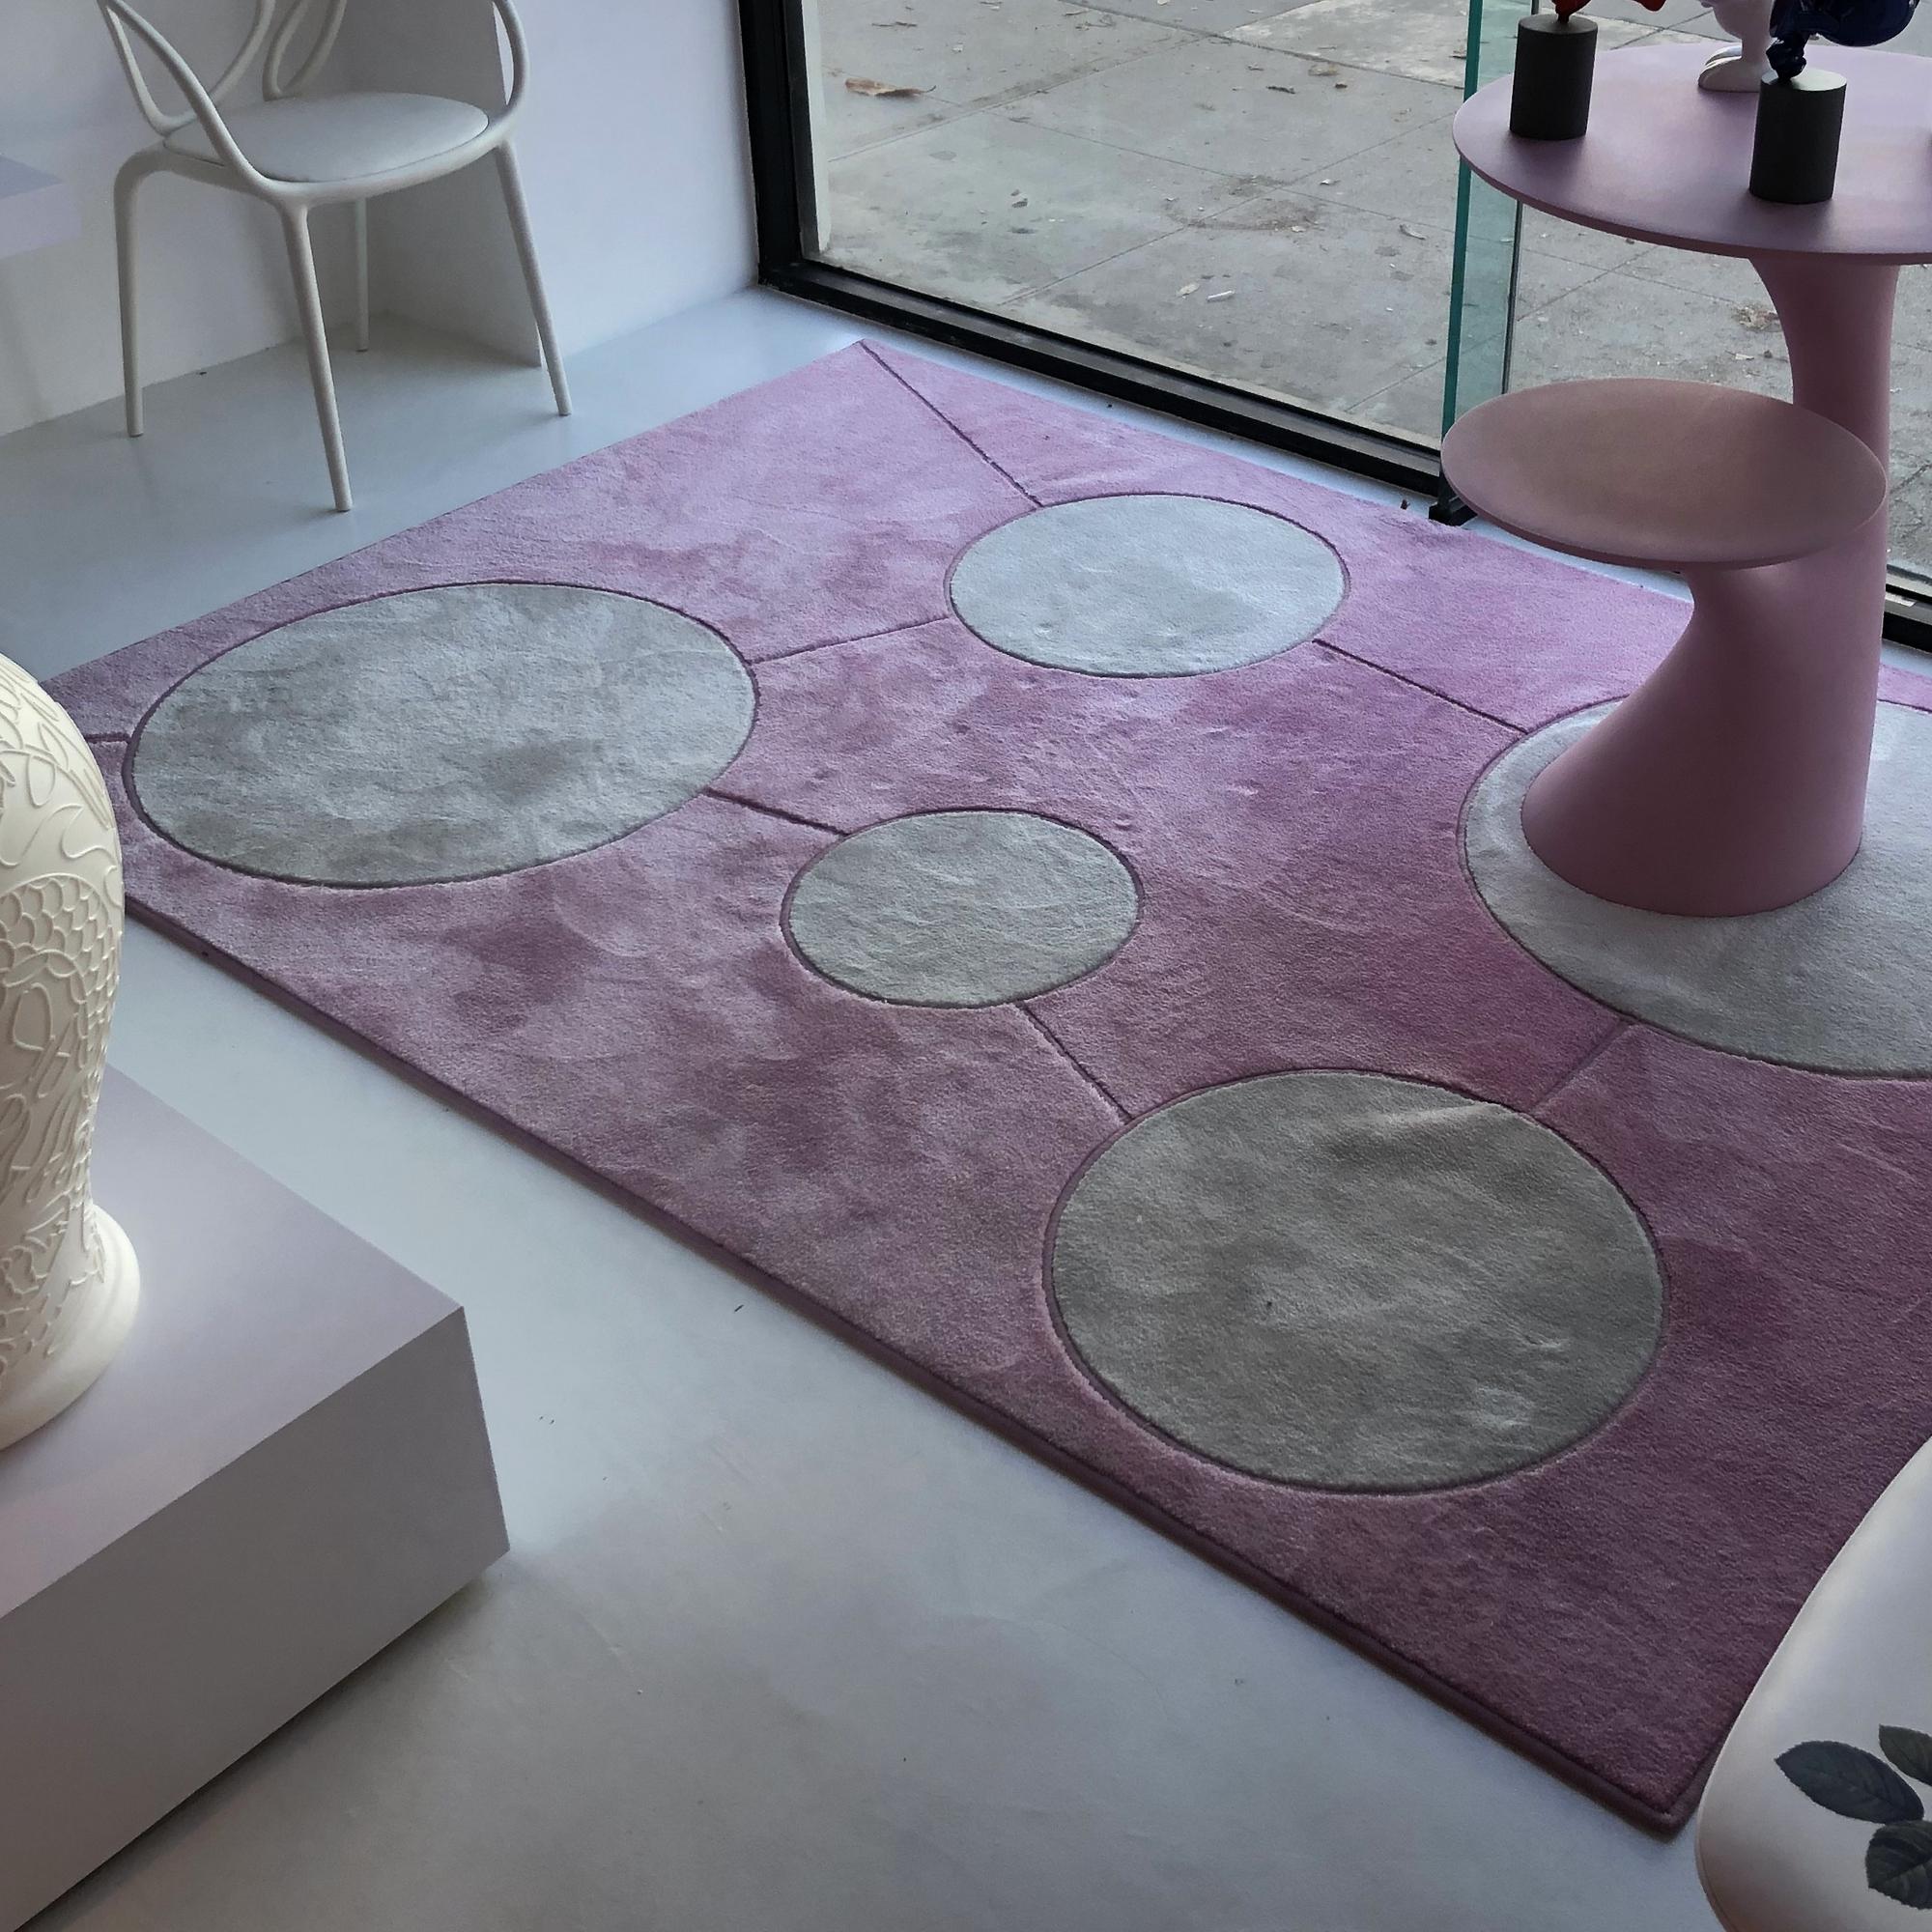 Italian In Stock in Los Angeles, Two Tones Pink and White Rug with Geometric Shapes